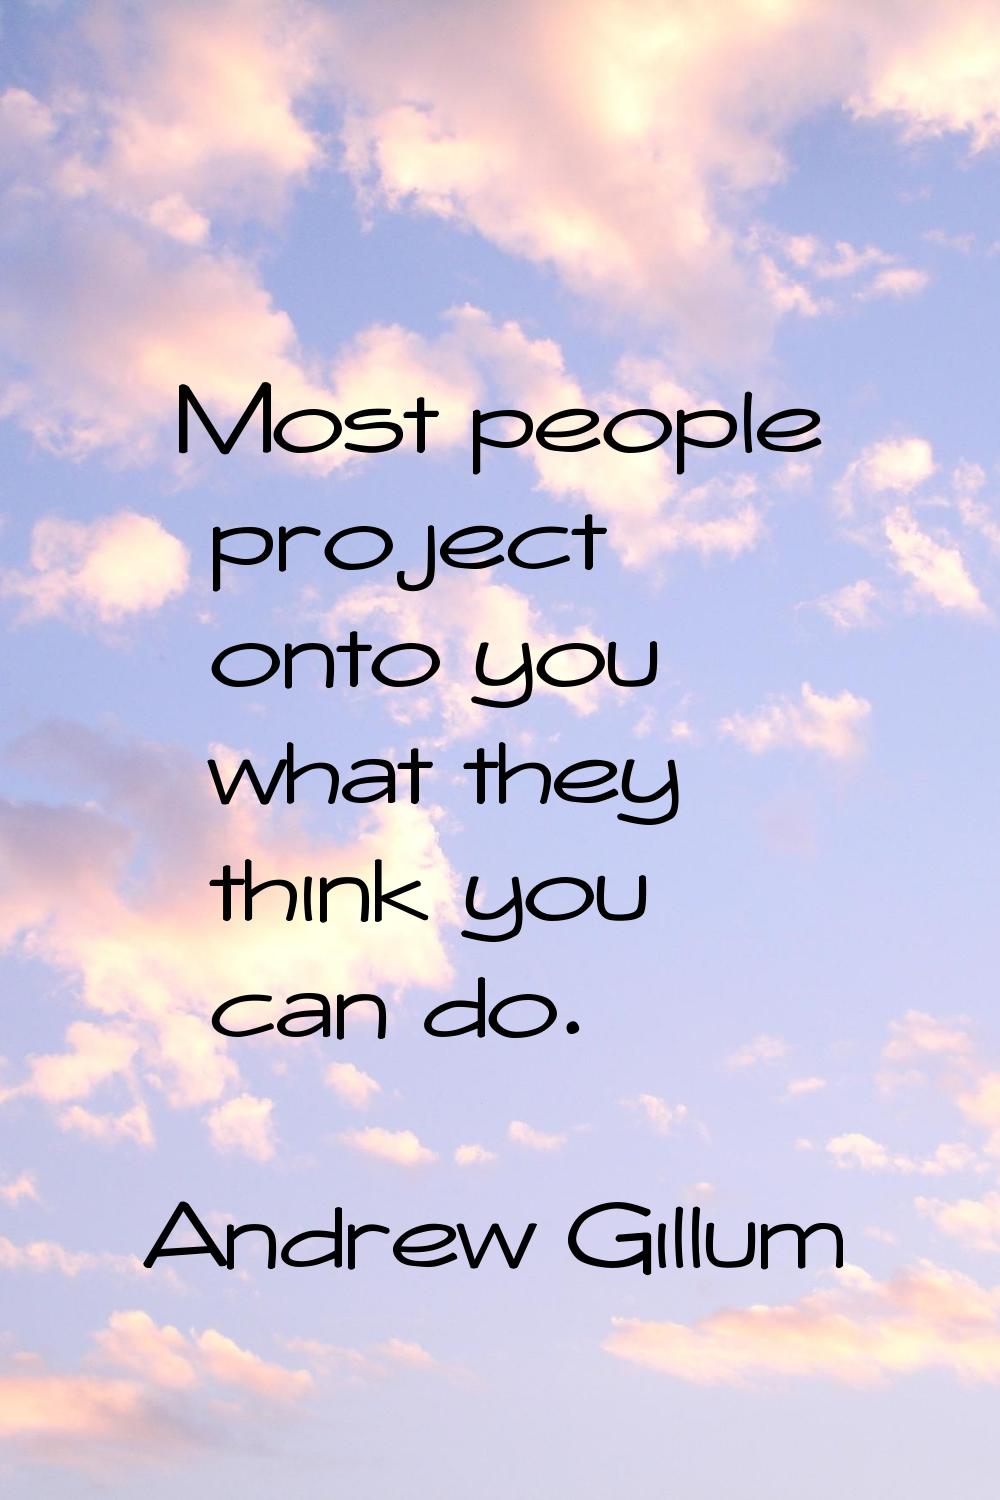 Most people project onto you what they think you can do.